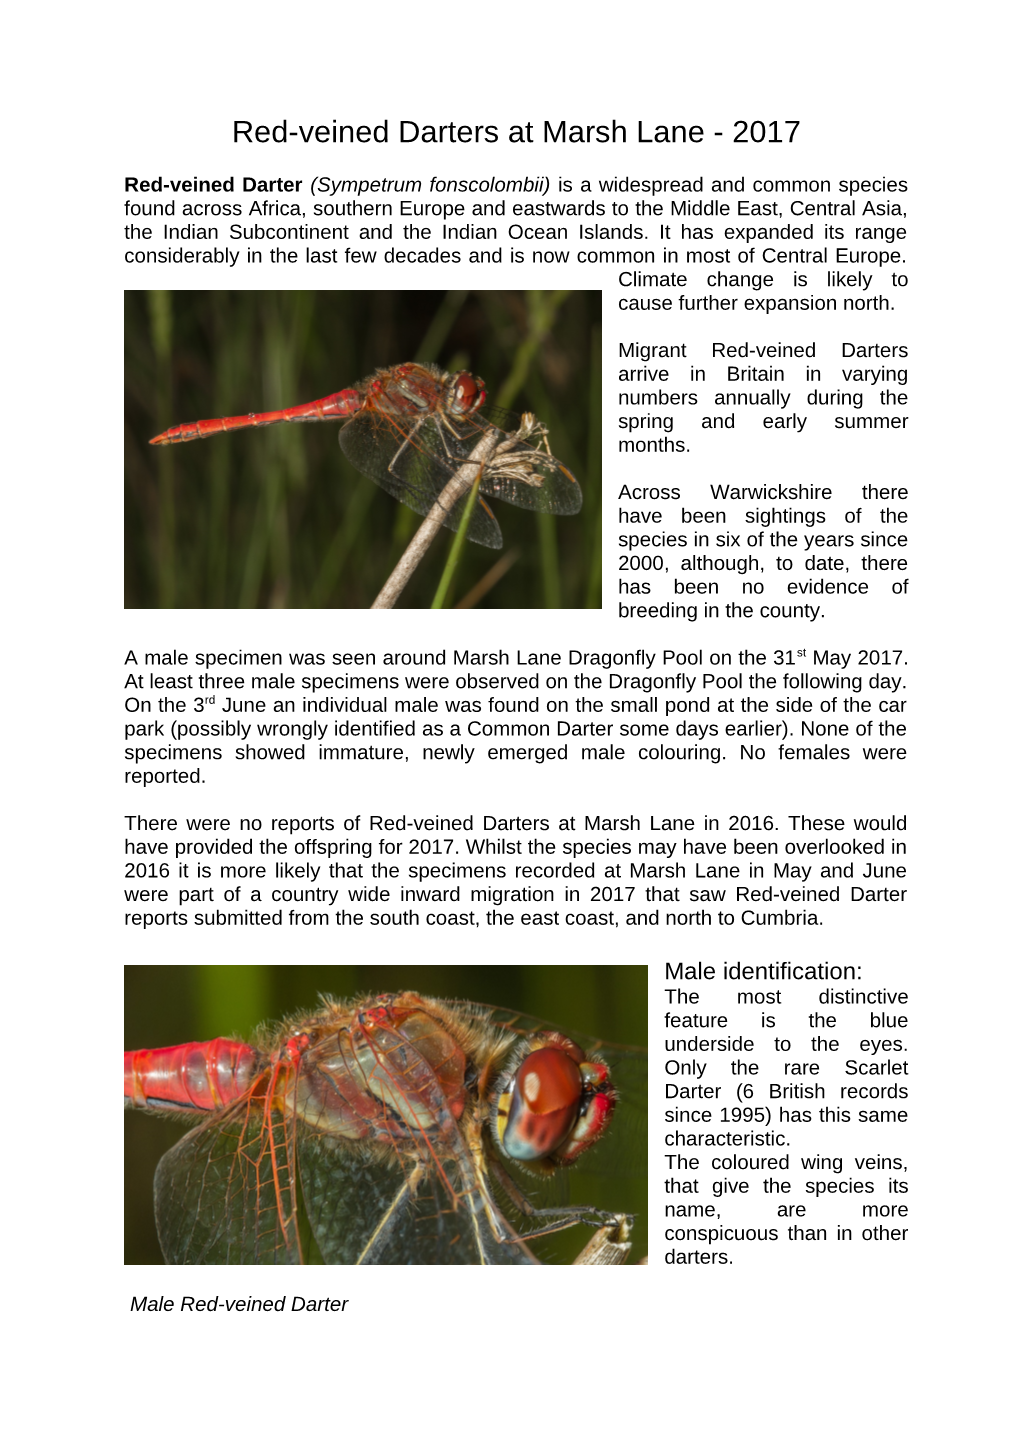 An Invasion of Red-Veined Darters